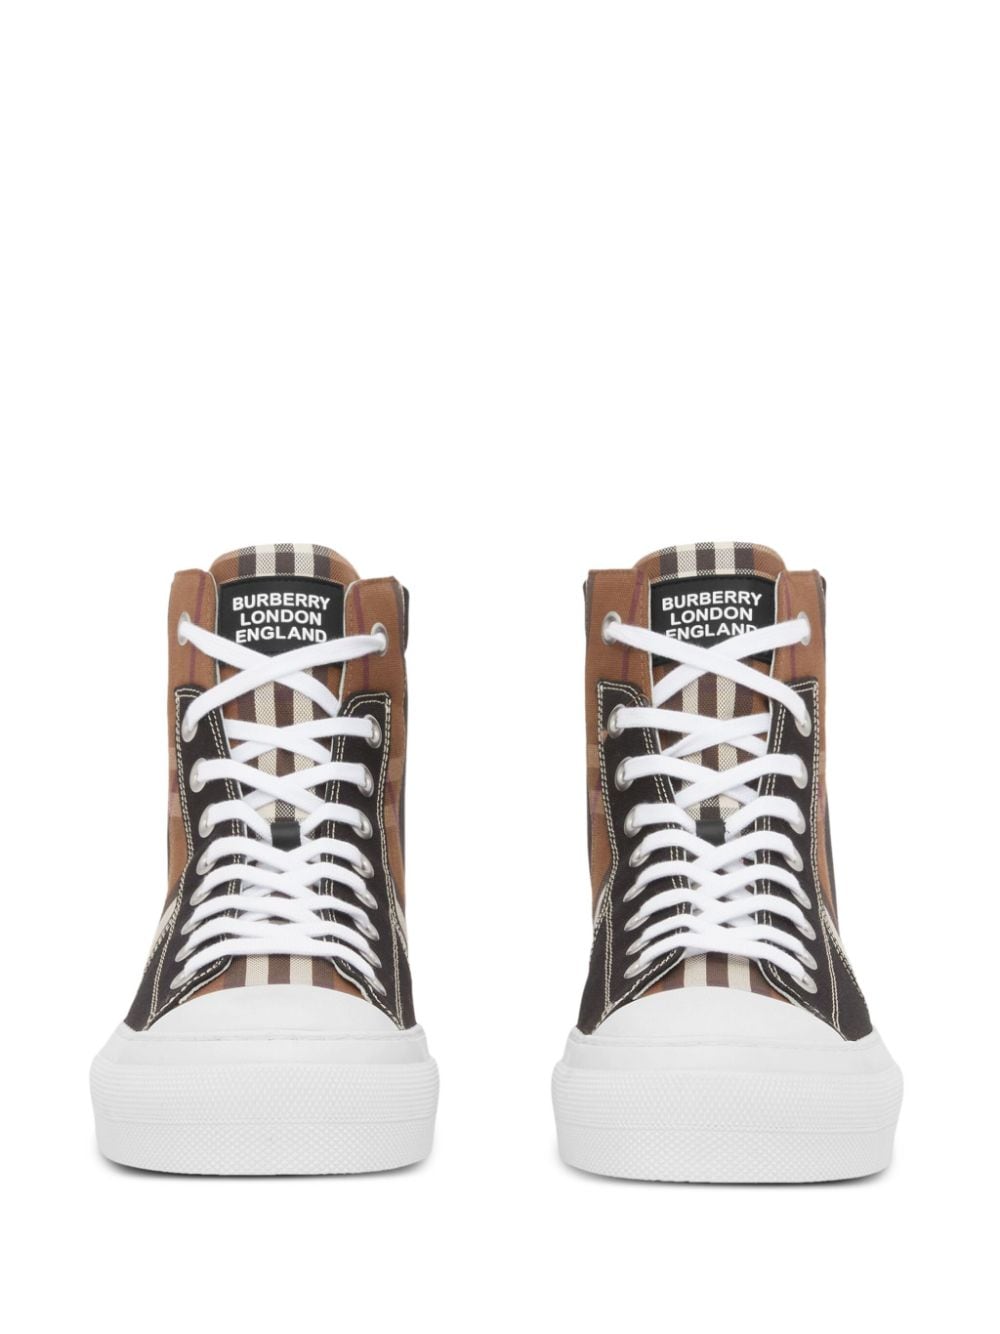 Burberry Vintage Check lace-up Sneakers - Farfetch